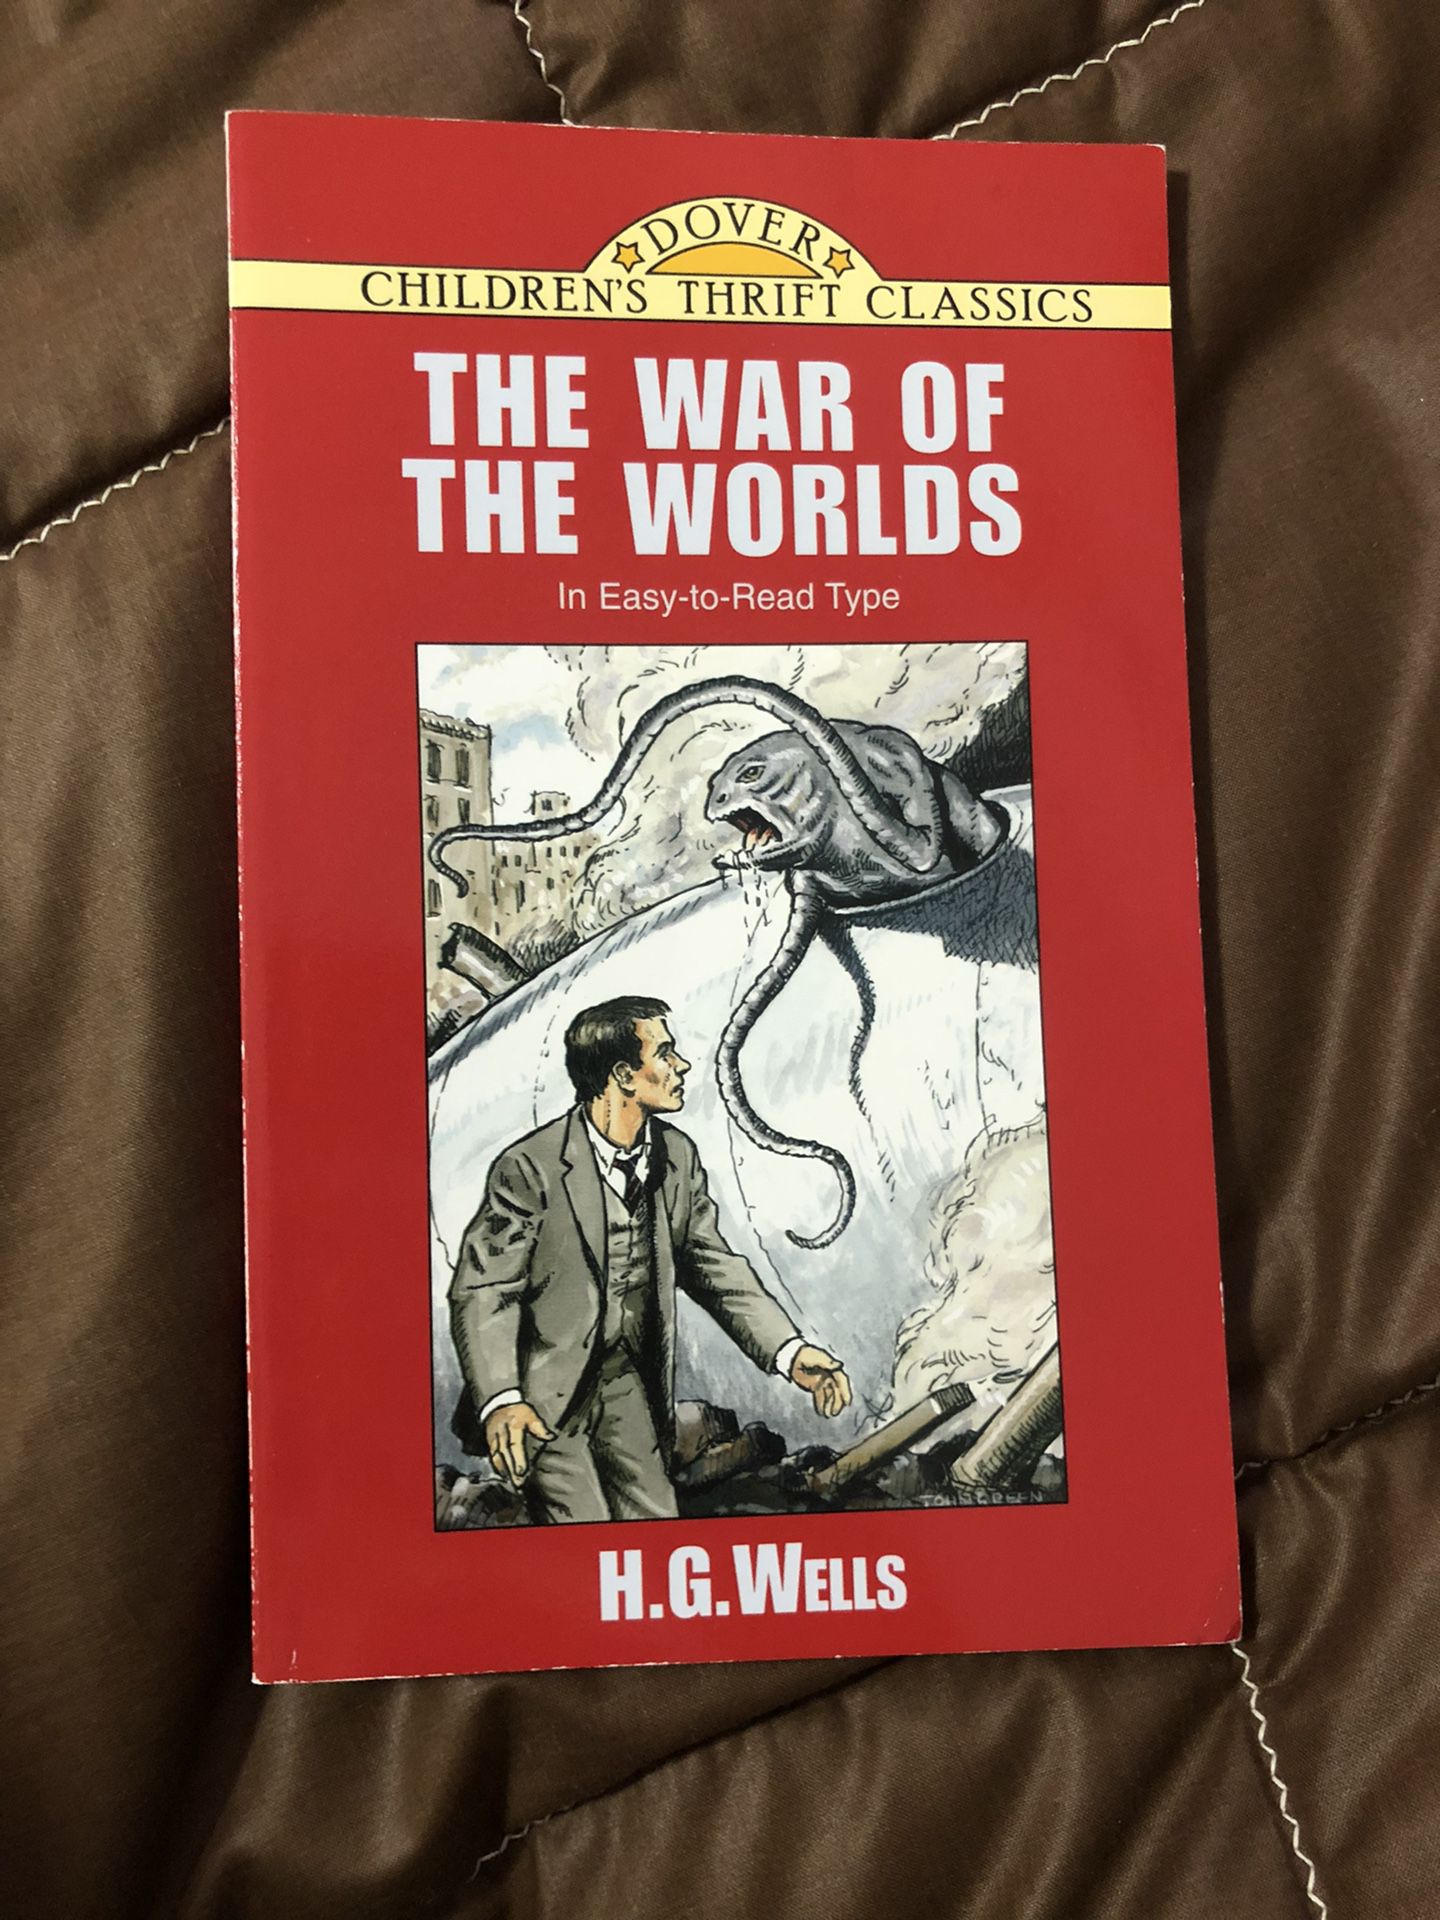 The War of the Worlds by H. G. Wells (paperback)